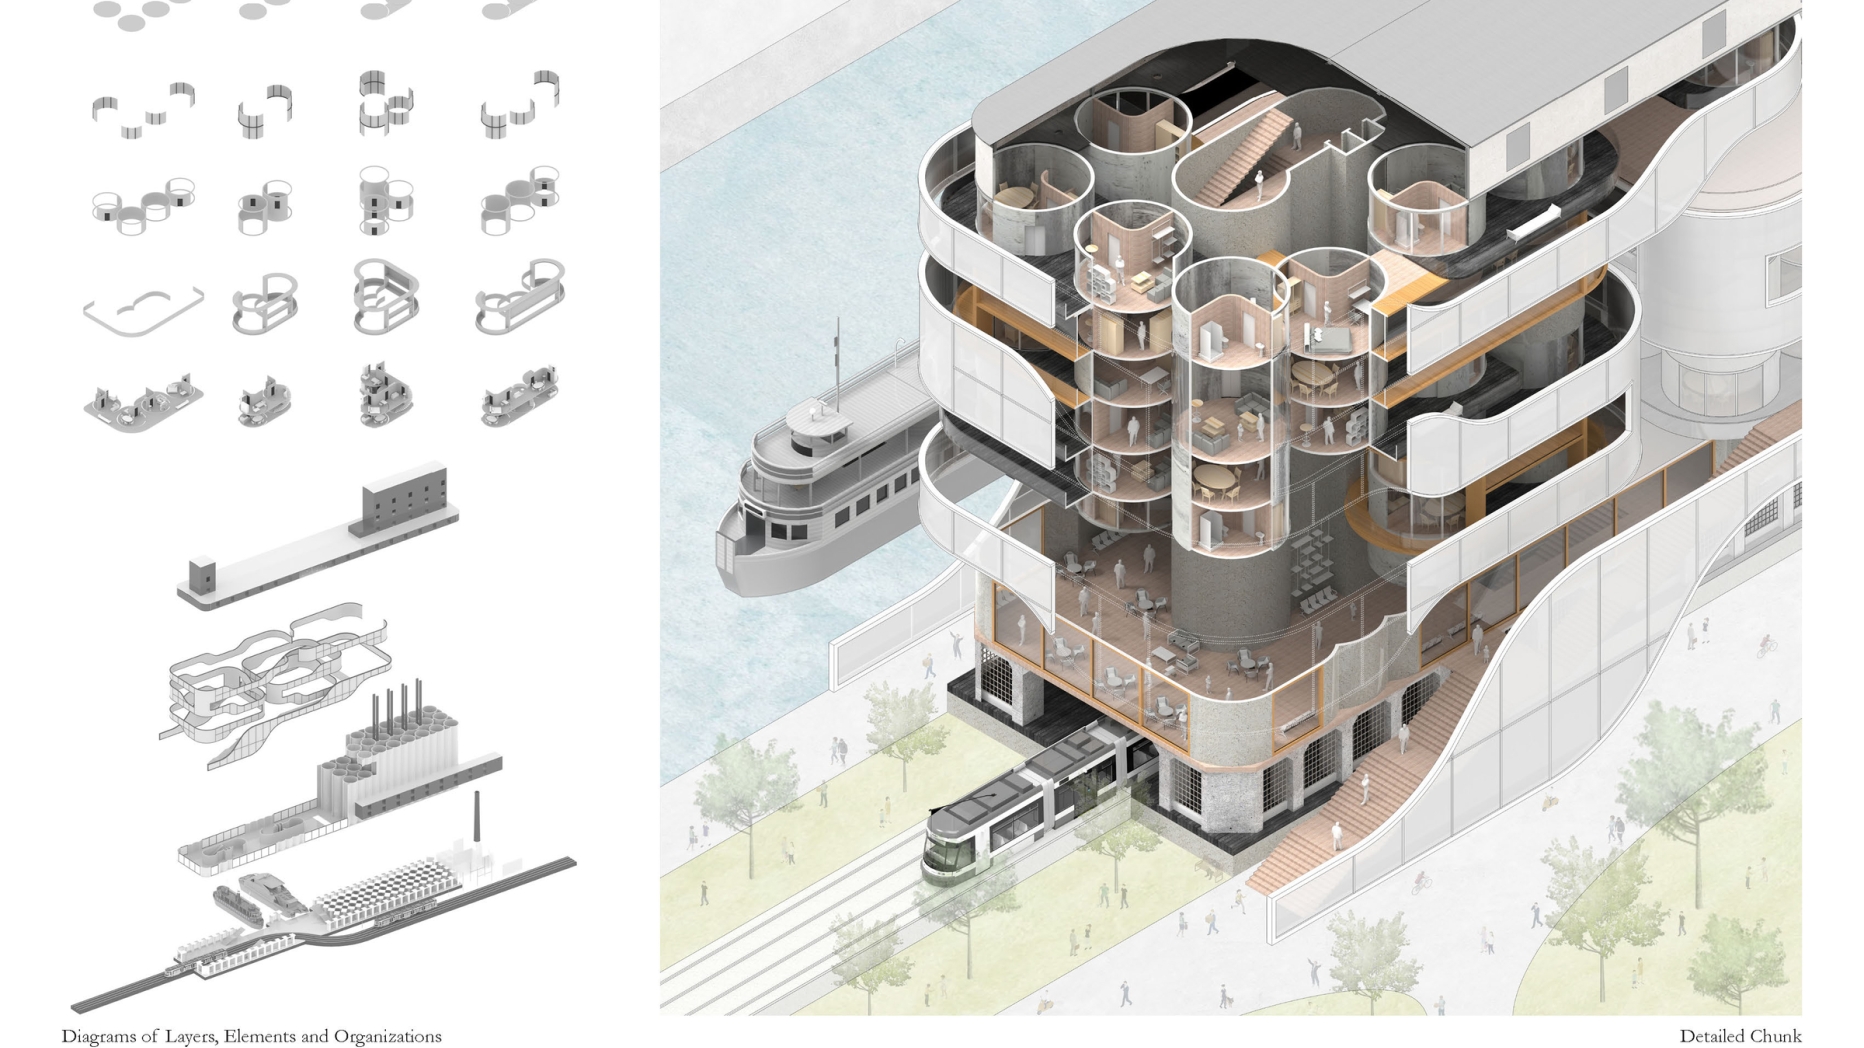 Cutaway view showing cylindrical structures and train and ferry integrate in to the building structure